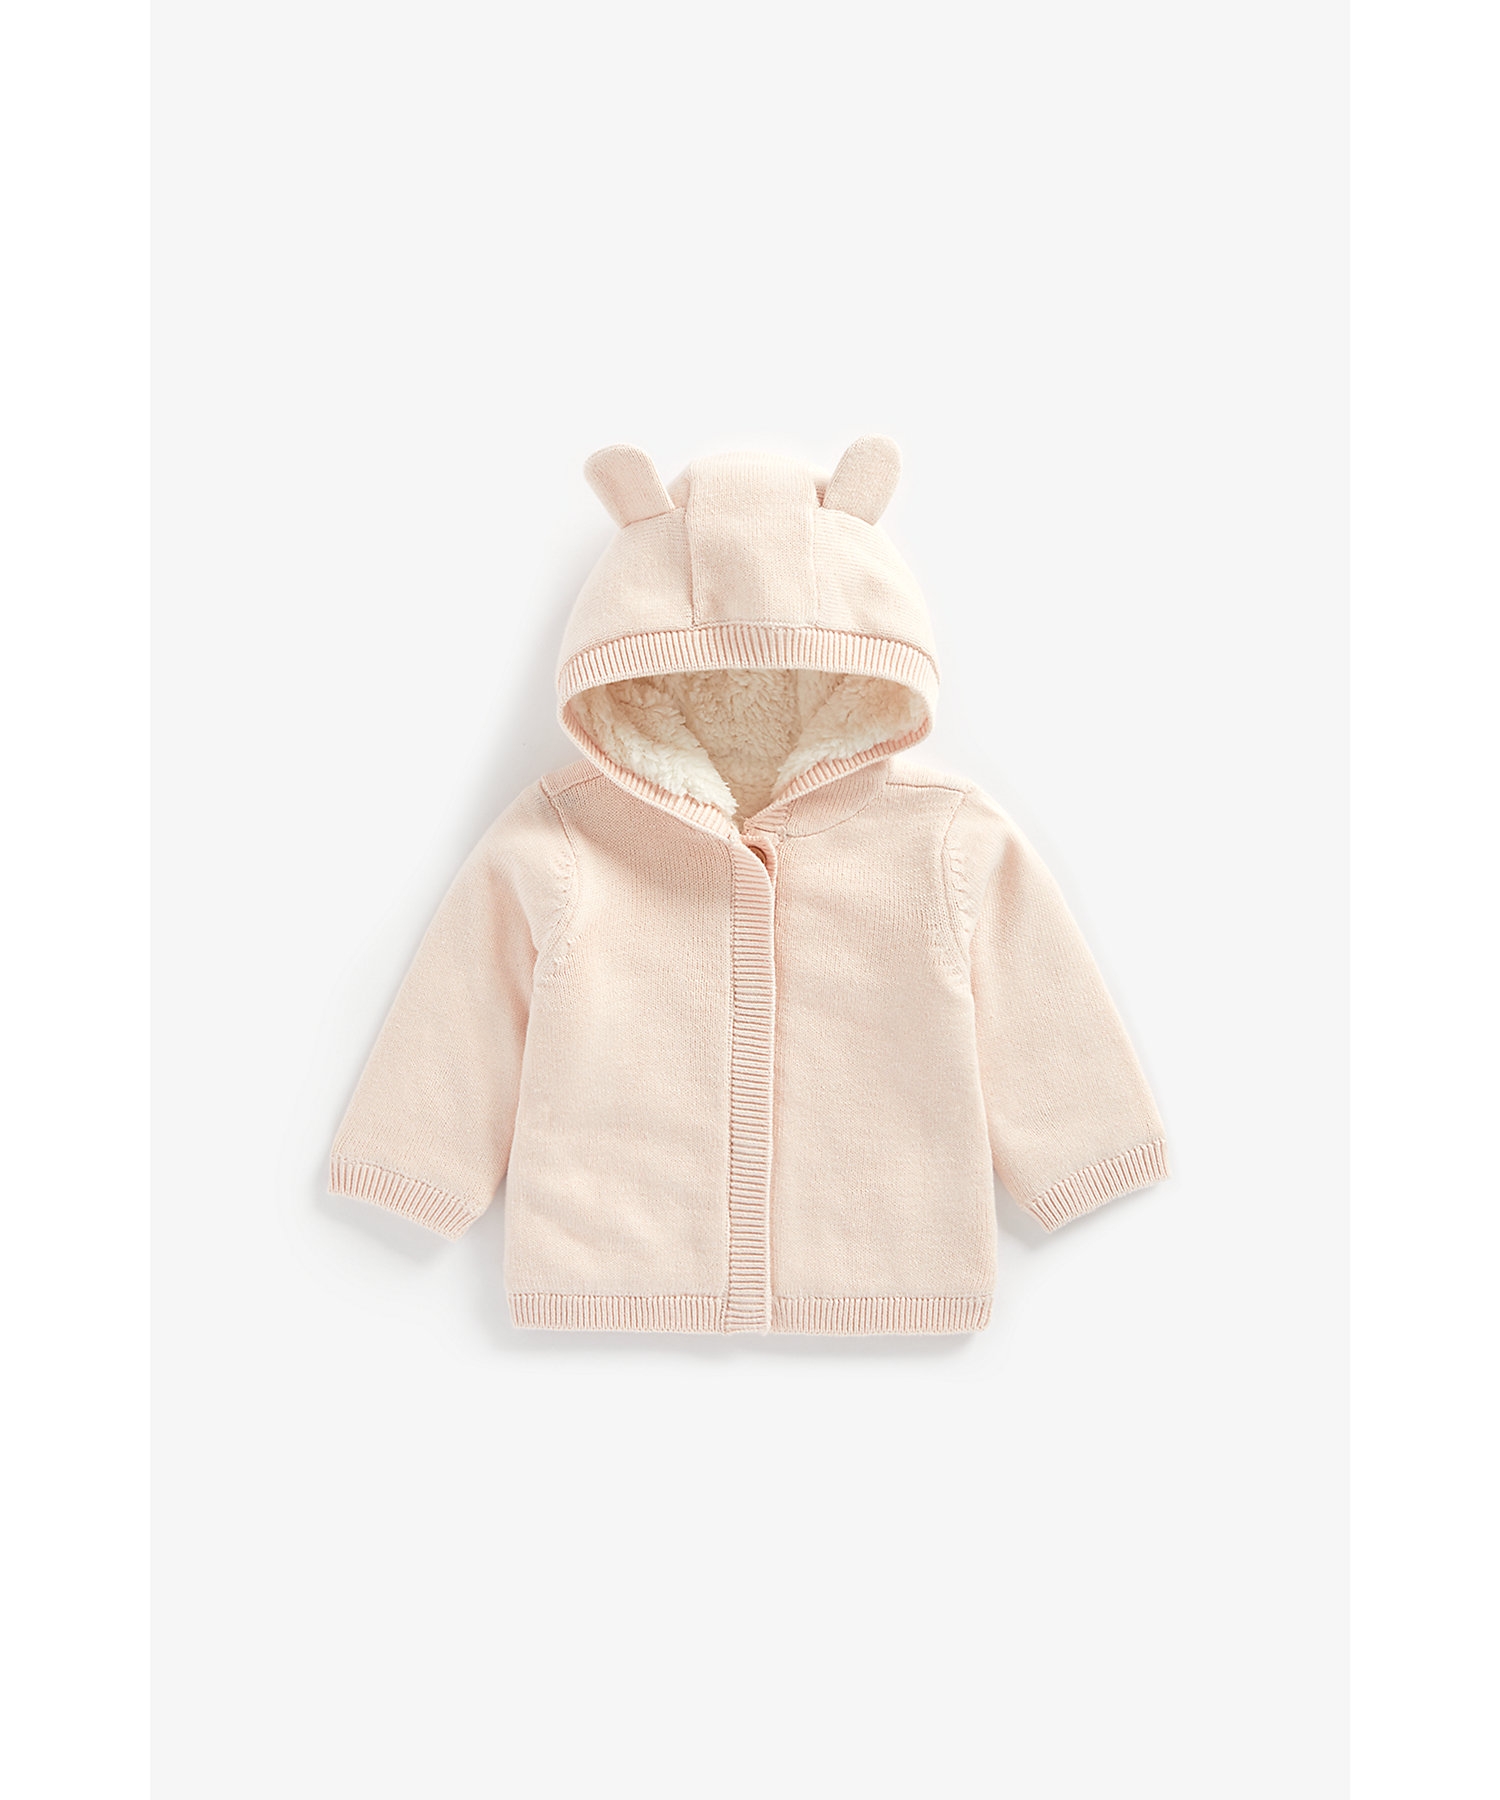 Mothercare | Girls Full Sleeves Fleece Lined Hooded Cardigan 3D Ear Details - Pink